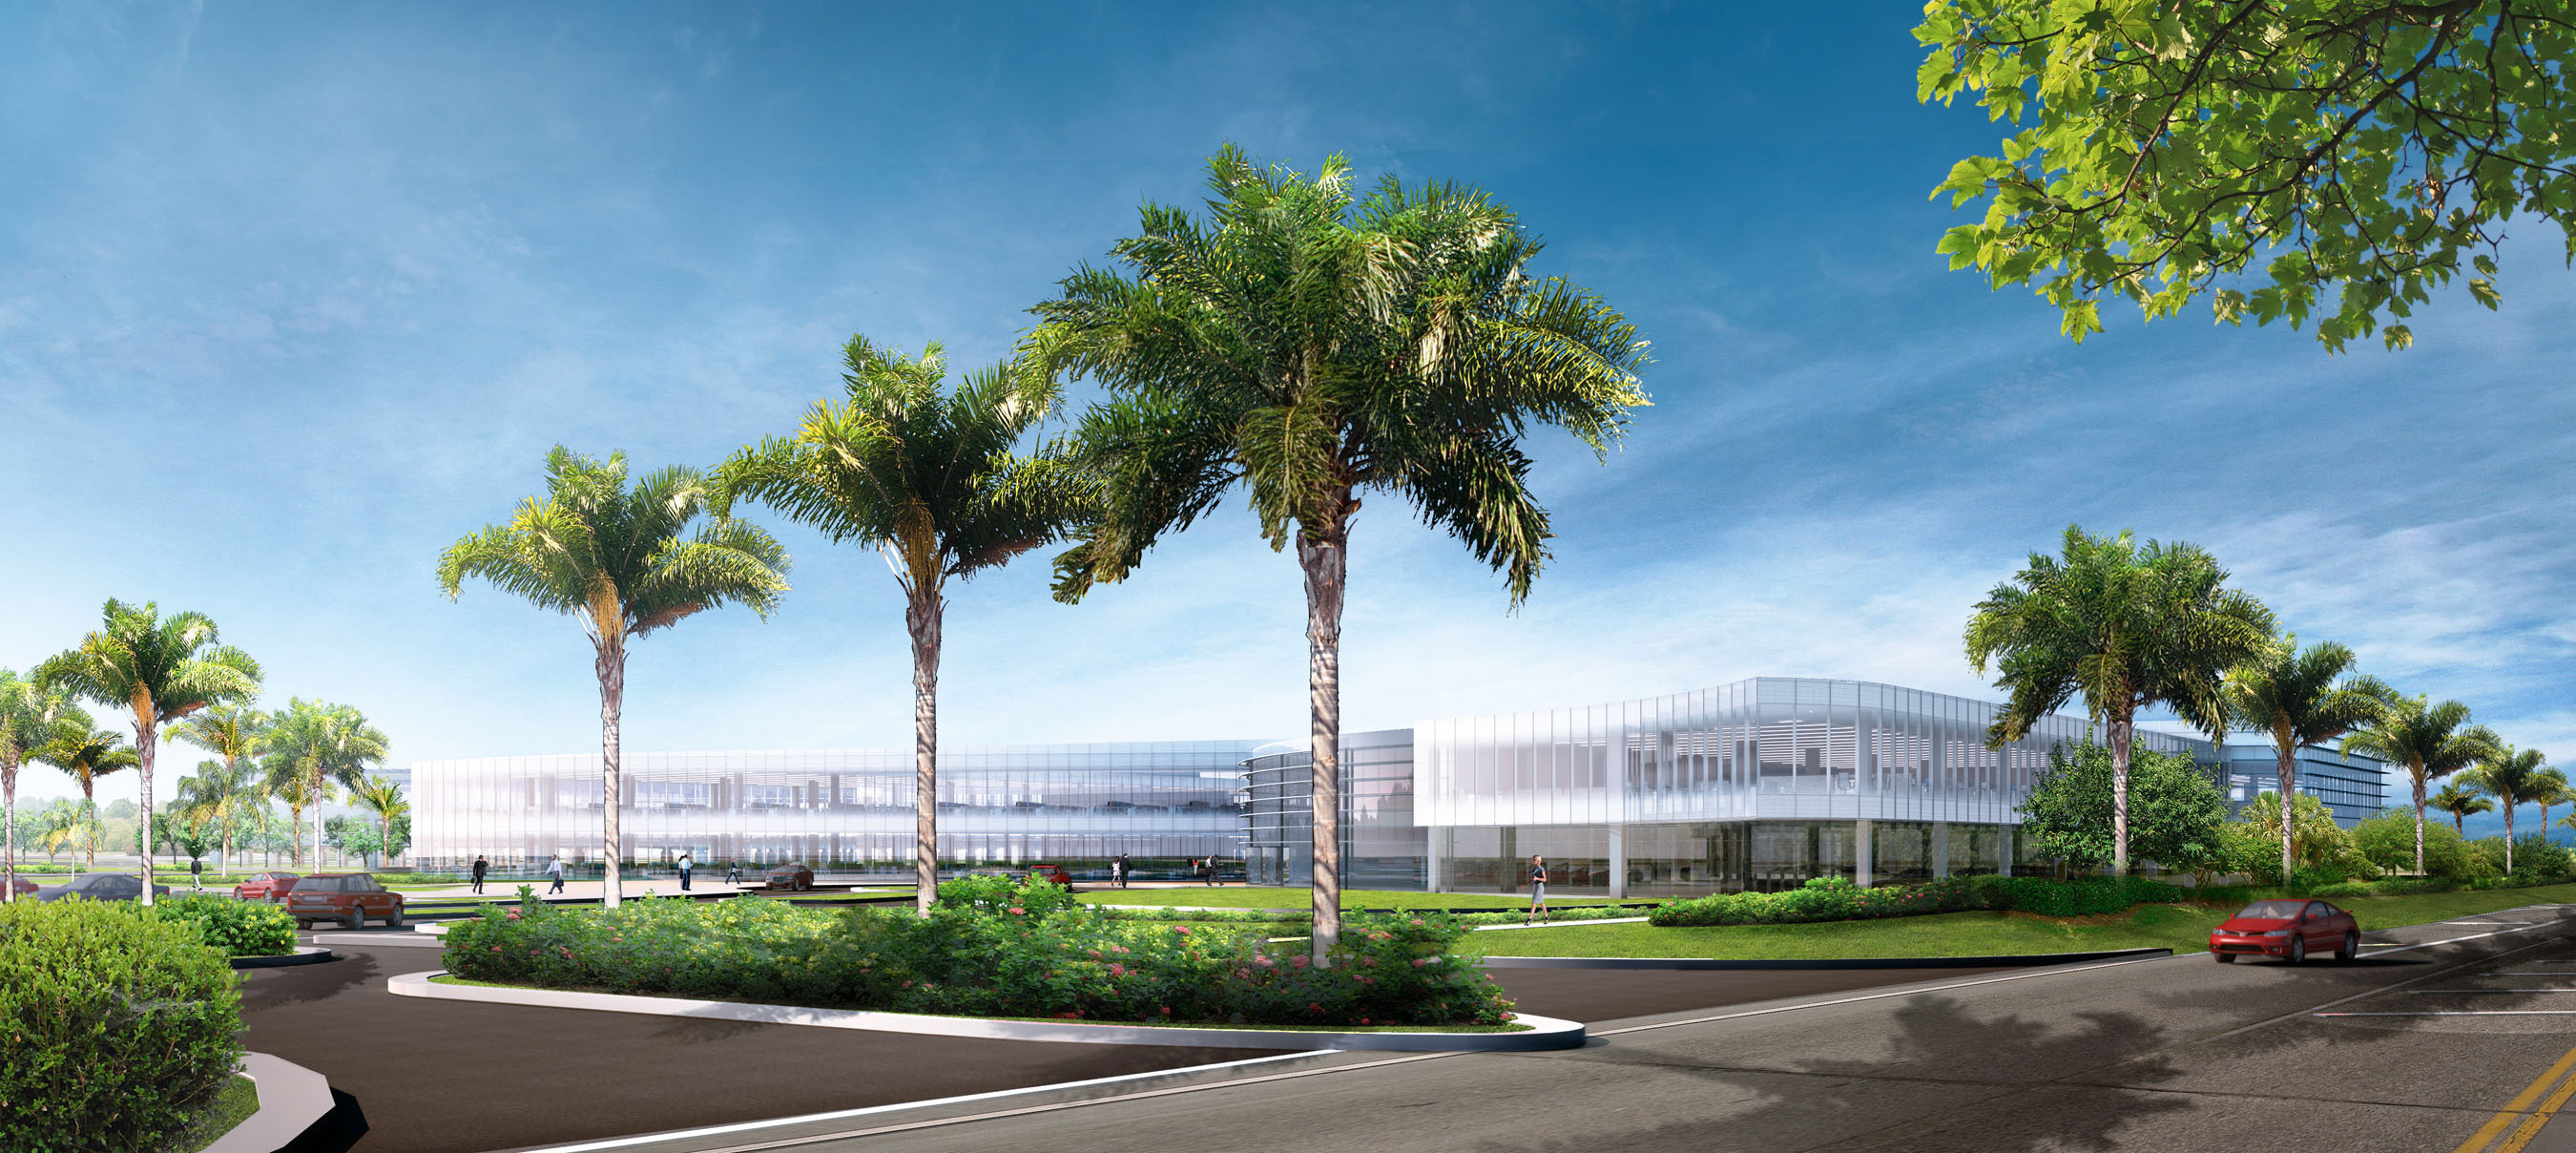 Hertz Announces Worldwide Headquarters Campus Design: Building design reflects Hertz's global branding and mission to be 'employer of choice.' (PRNewsFoto/The Hertz Corporation) (PRNewsFoto/THE HERTZ CORPORATION)